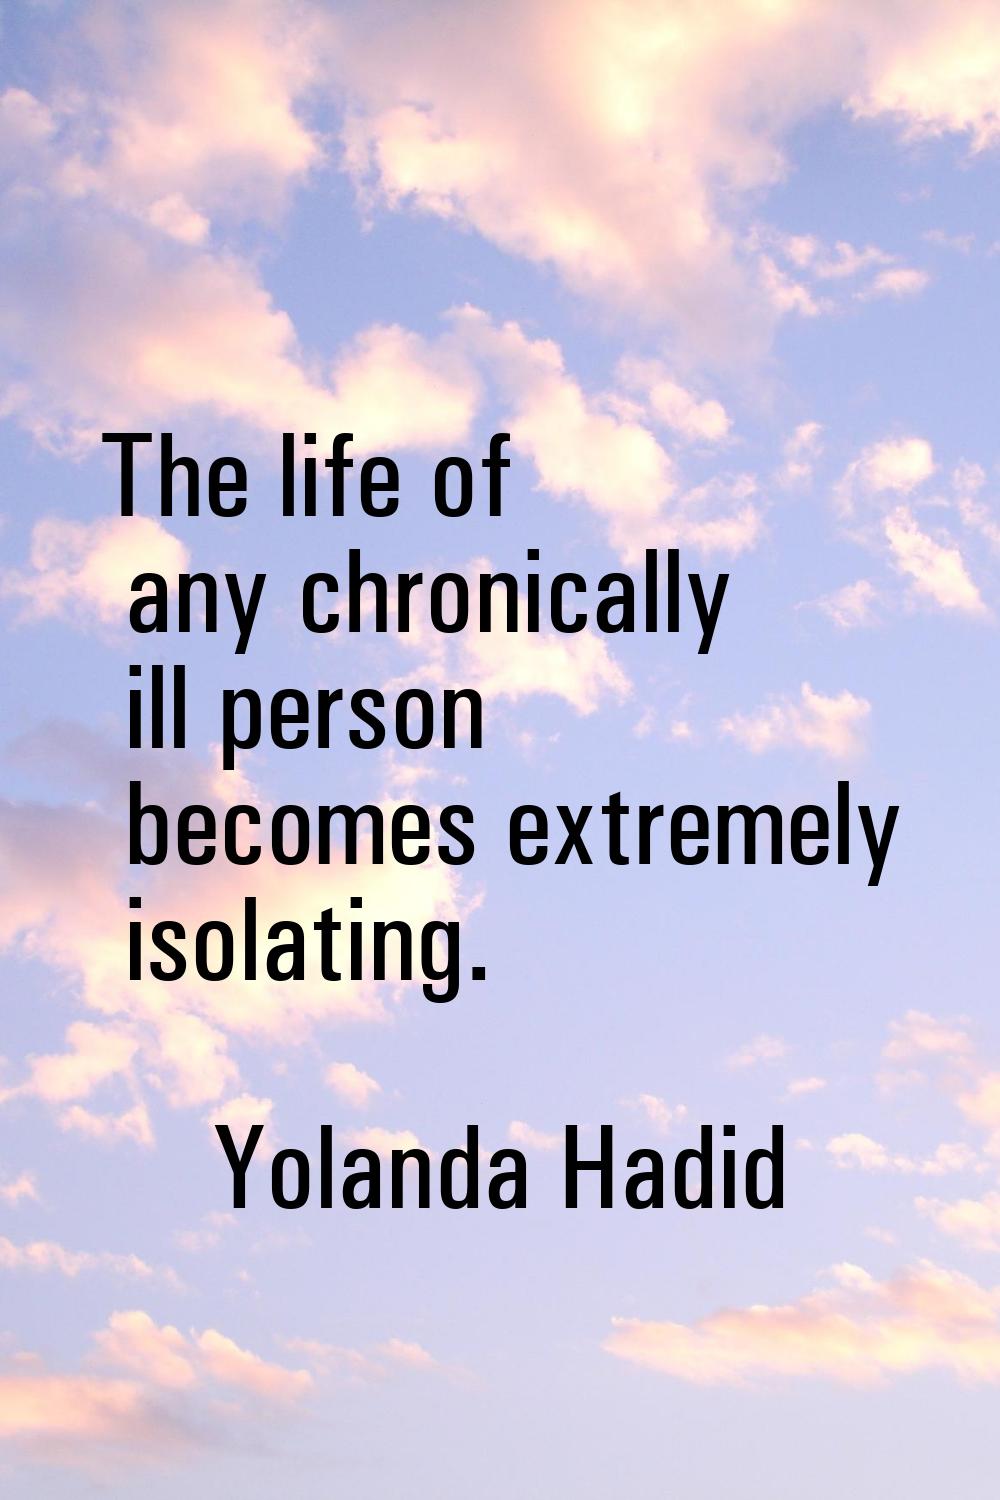 The life of any chronically ill person becomes extremely isolating.